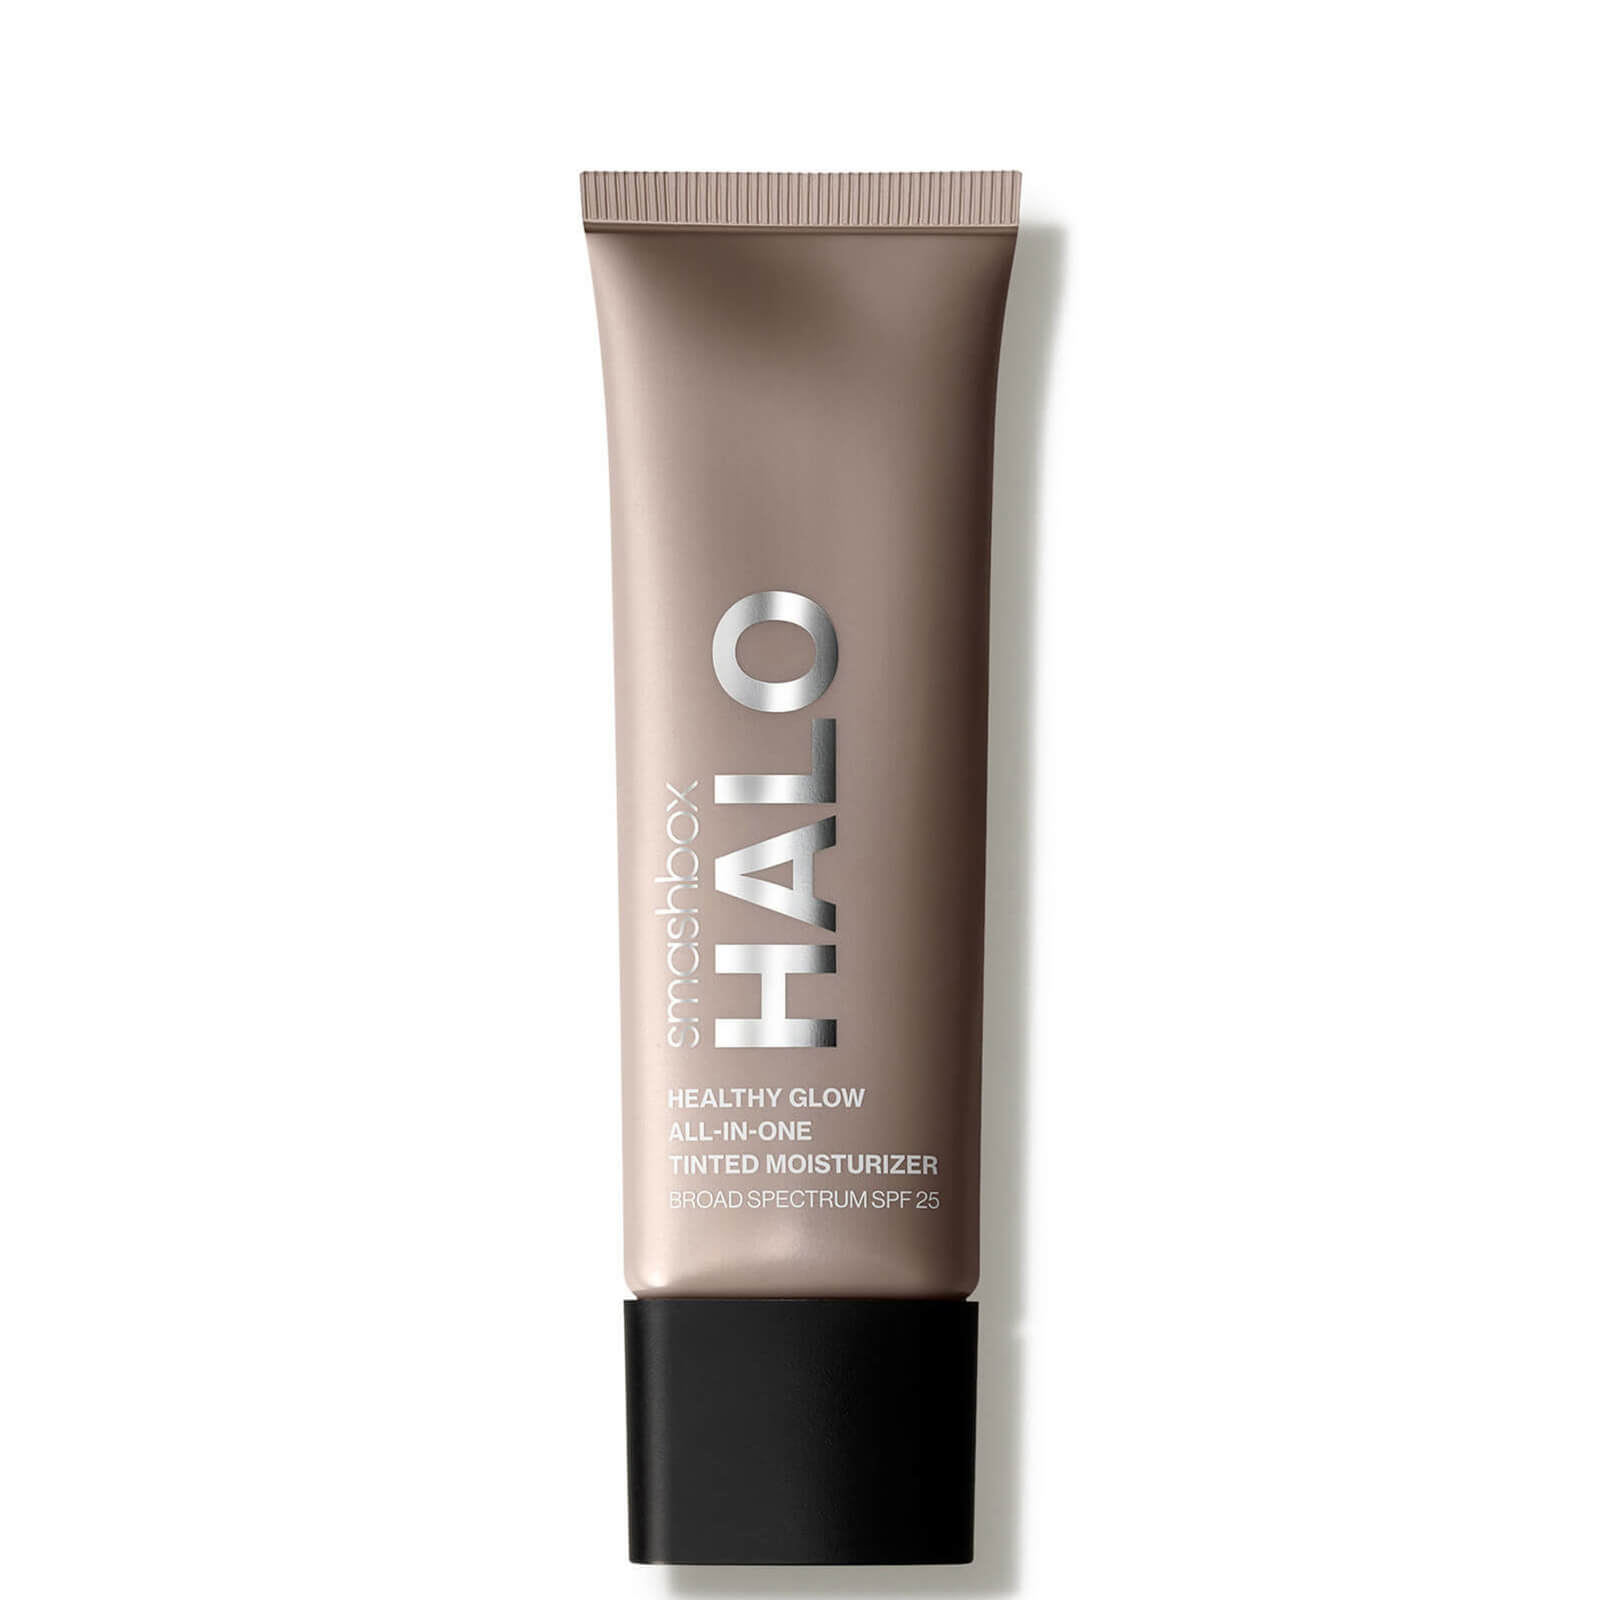 Image of Smashbox Halo Healthy Glow All-in-One SPF25 Tinted Moisturiser 40ml (Various Shades) - Fair